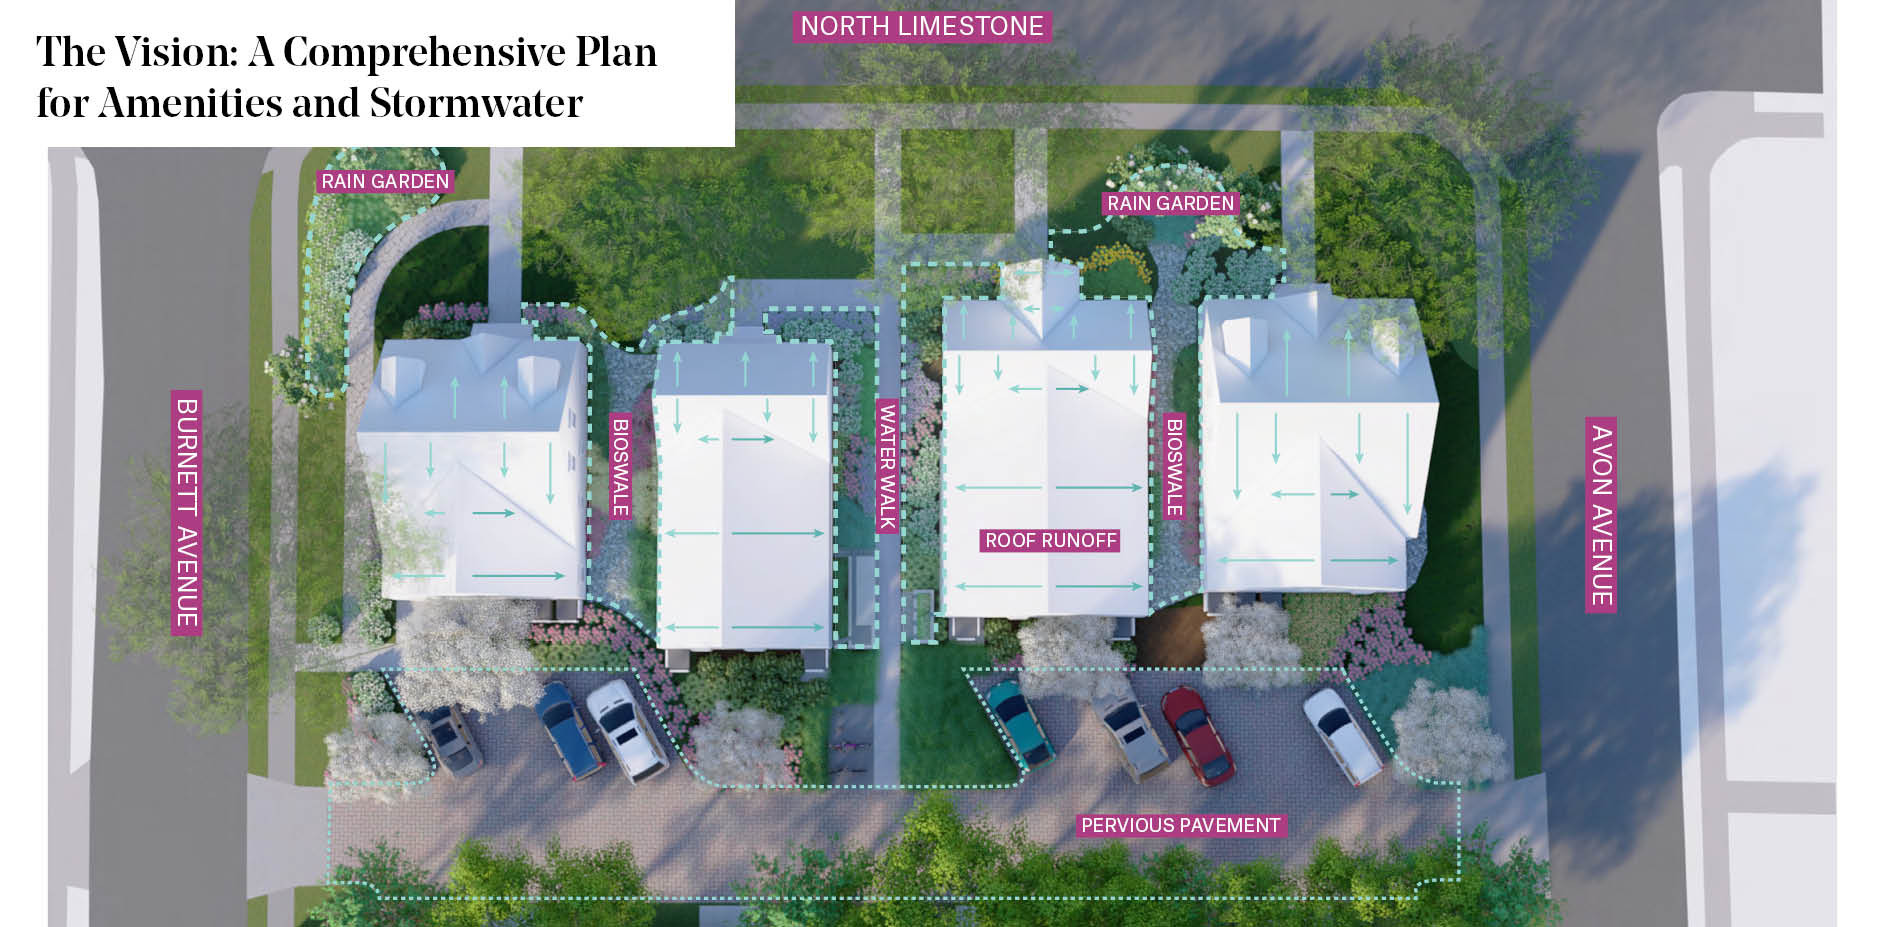 The Vision: A Comprehensive Plan for Both Amenities and Stormwater